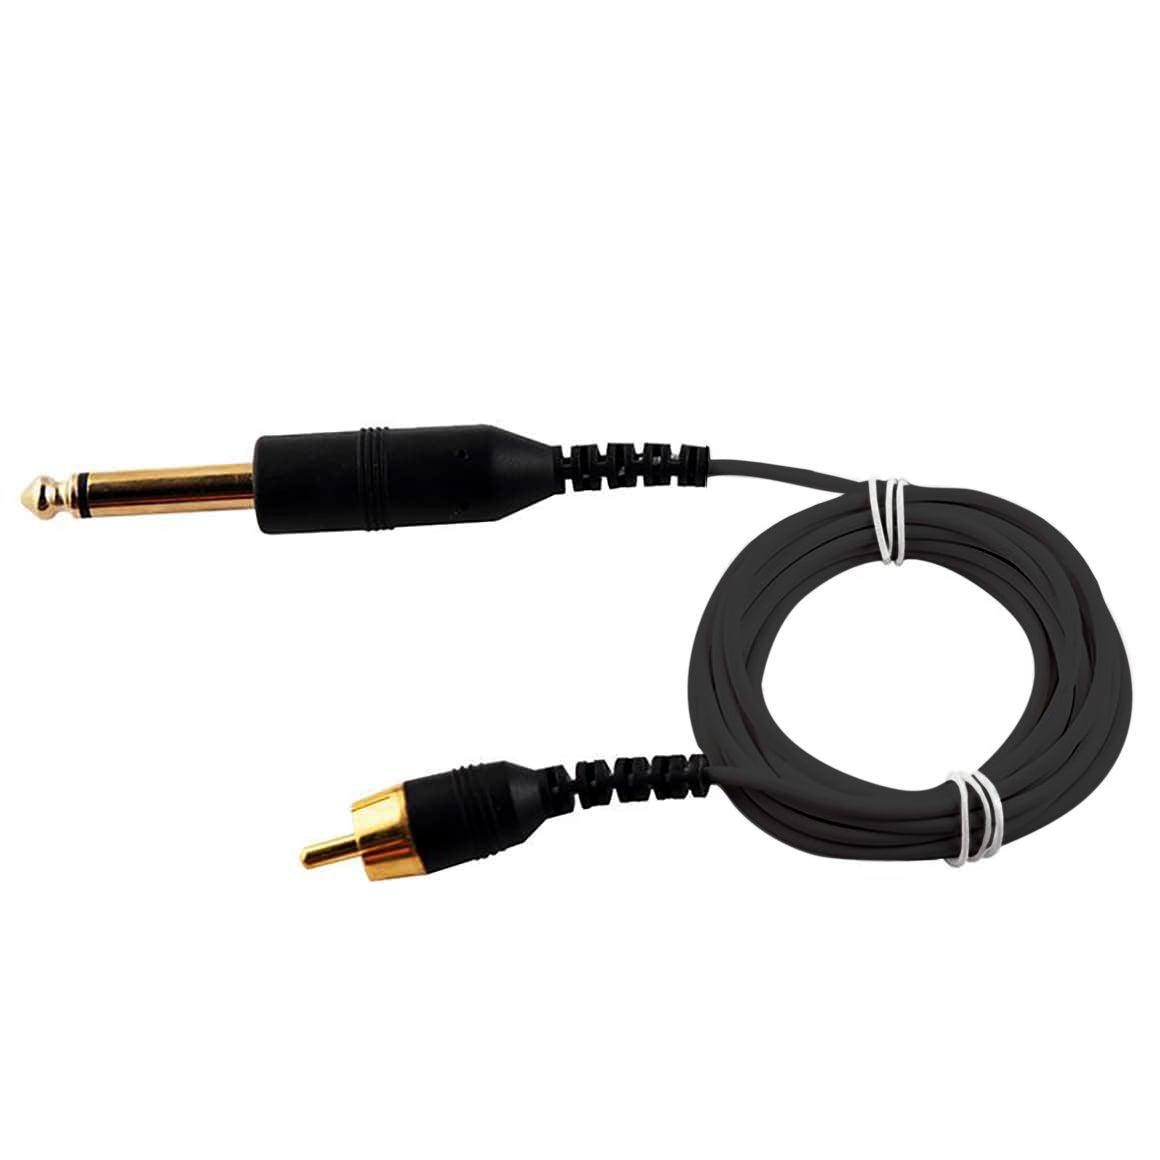 FYT Premium Gold Plated RCA Cable - 8FT - Power Supplies & Accessories - FYT Tattoo Supplies Canada